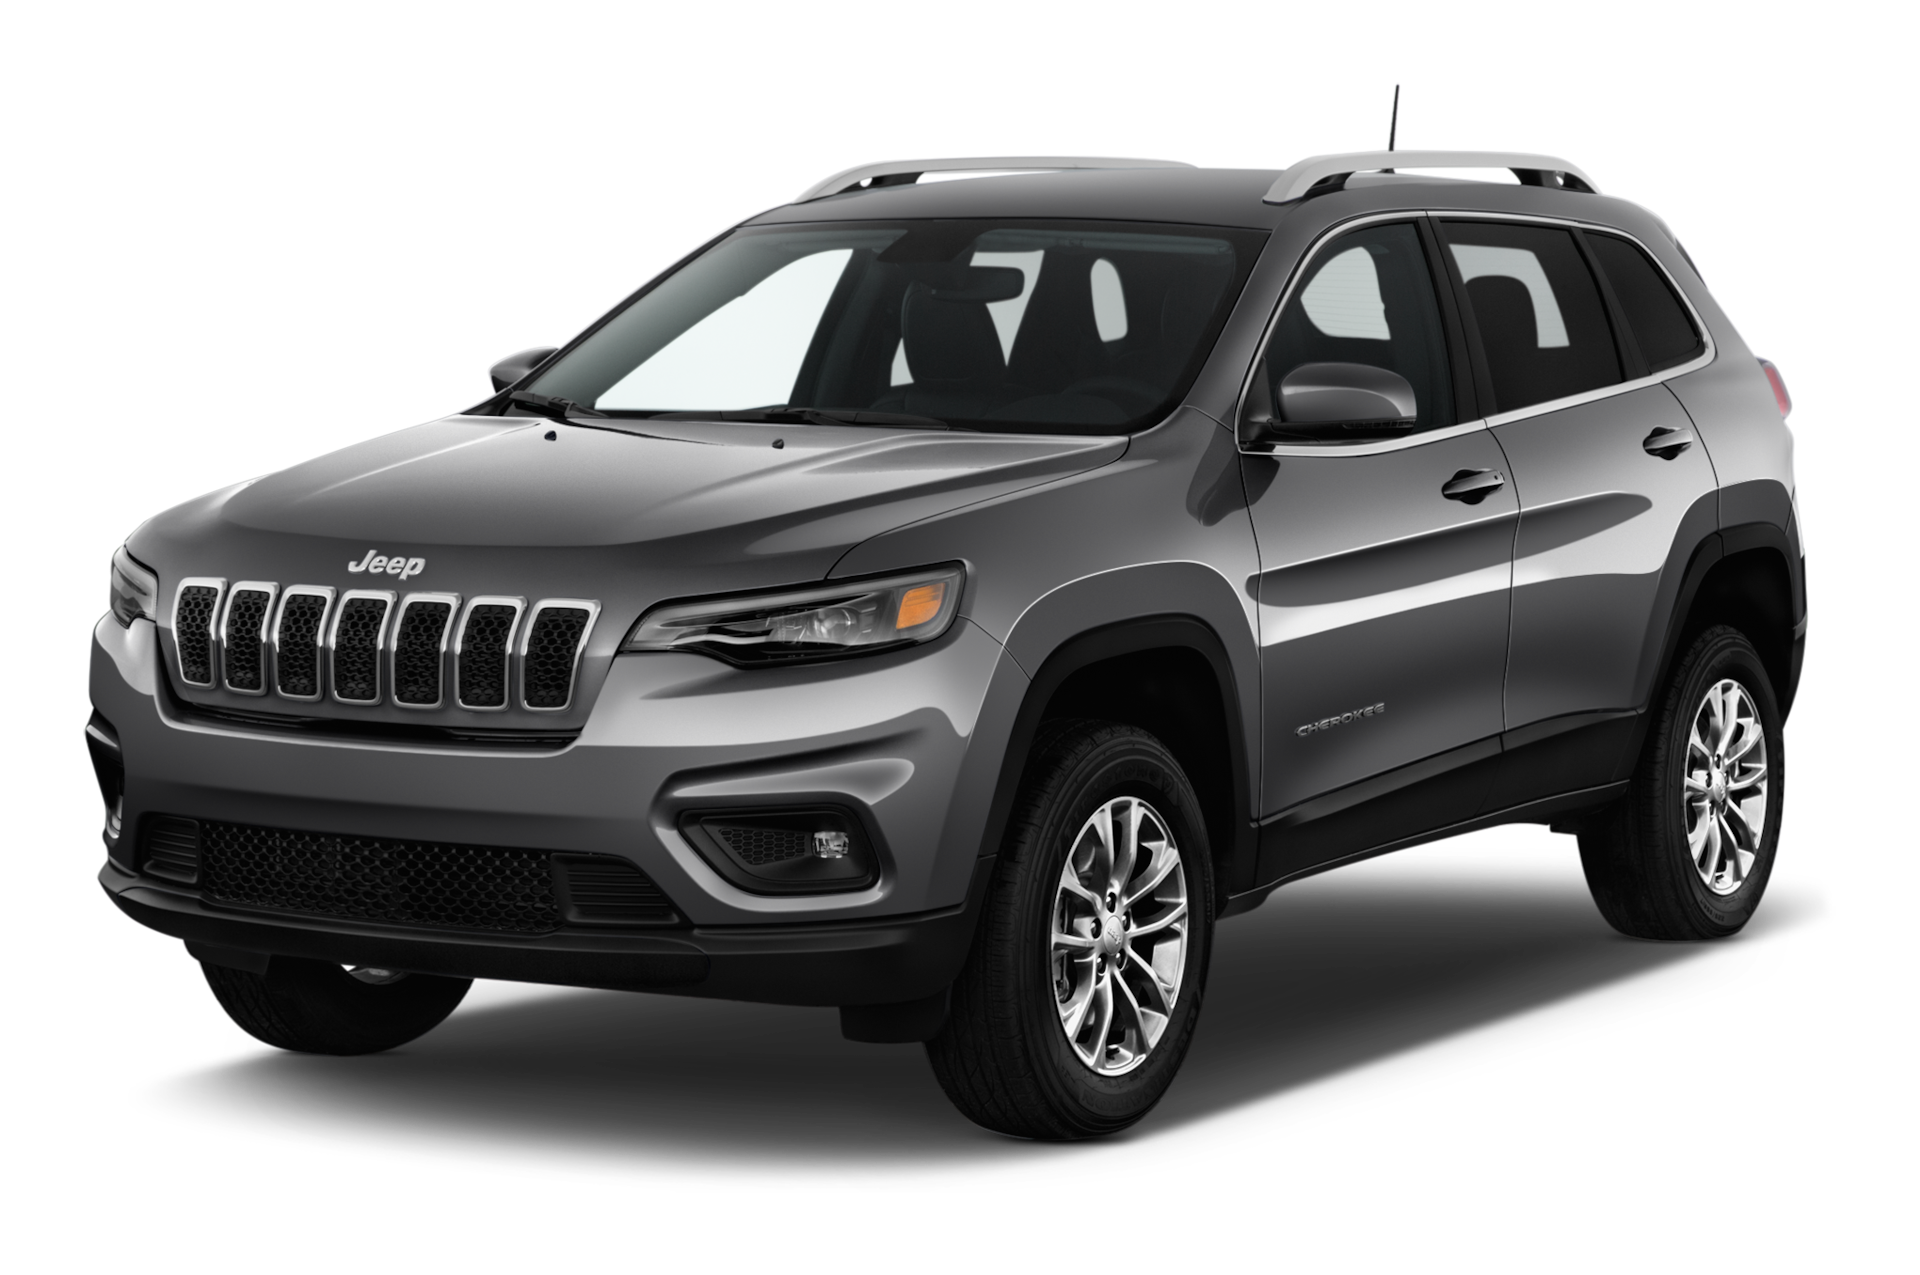 2019 Jeep Cherokee Prices, Reviews, and Photos - MotorTrend